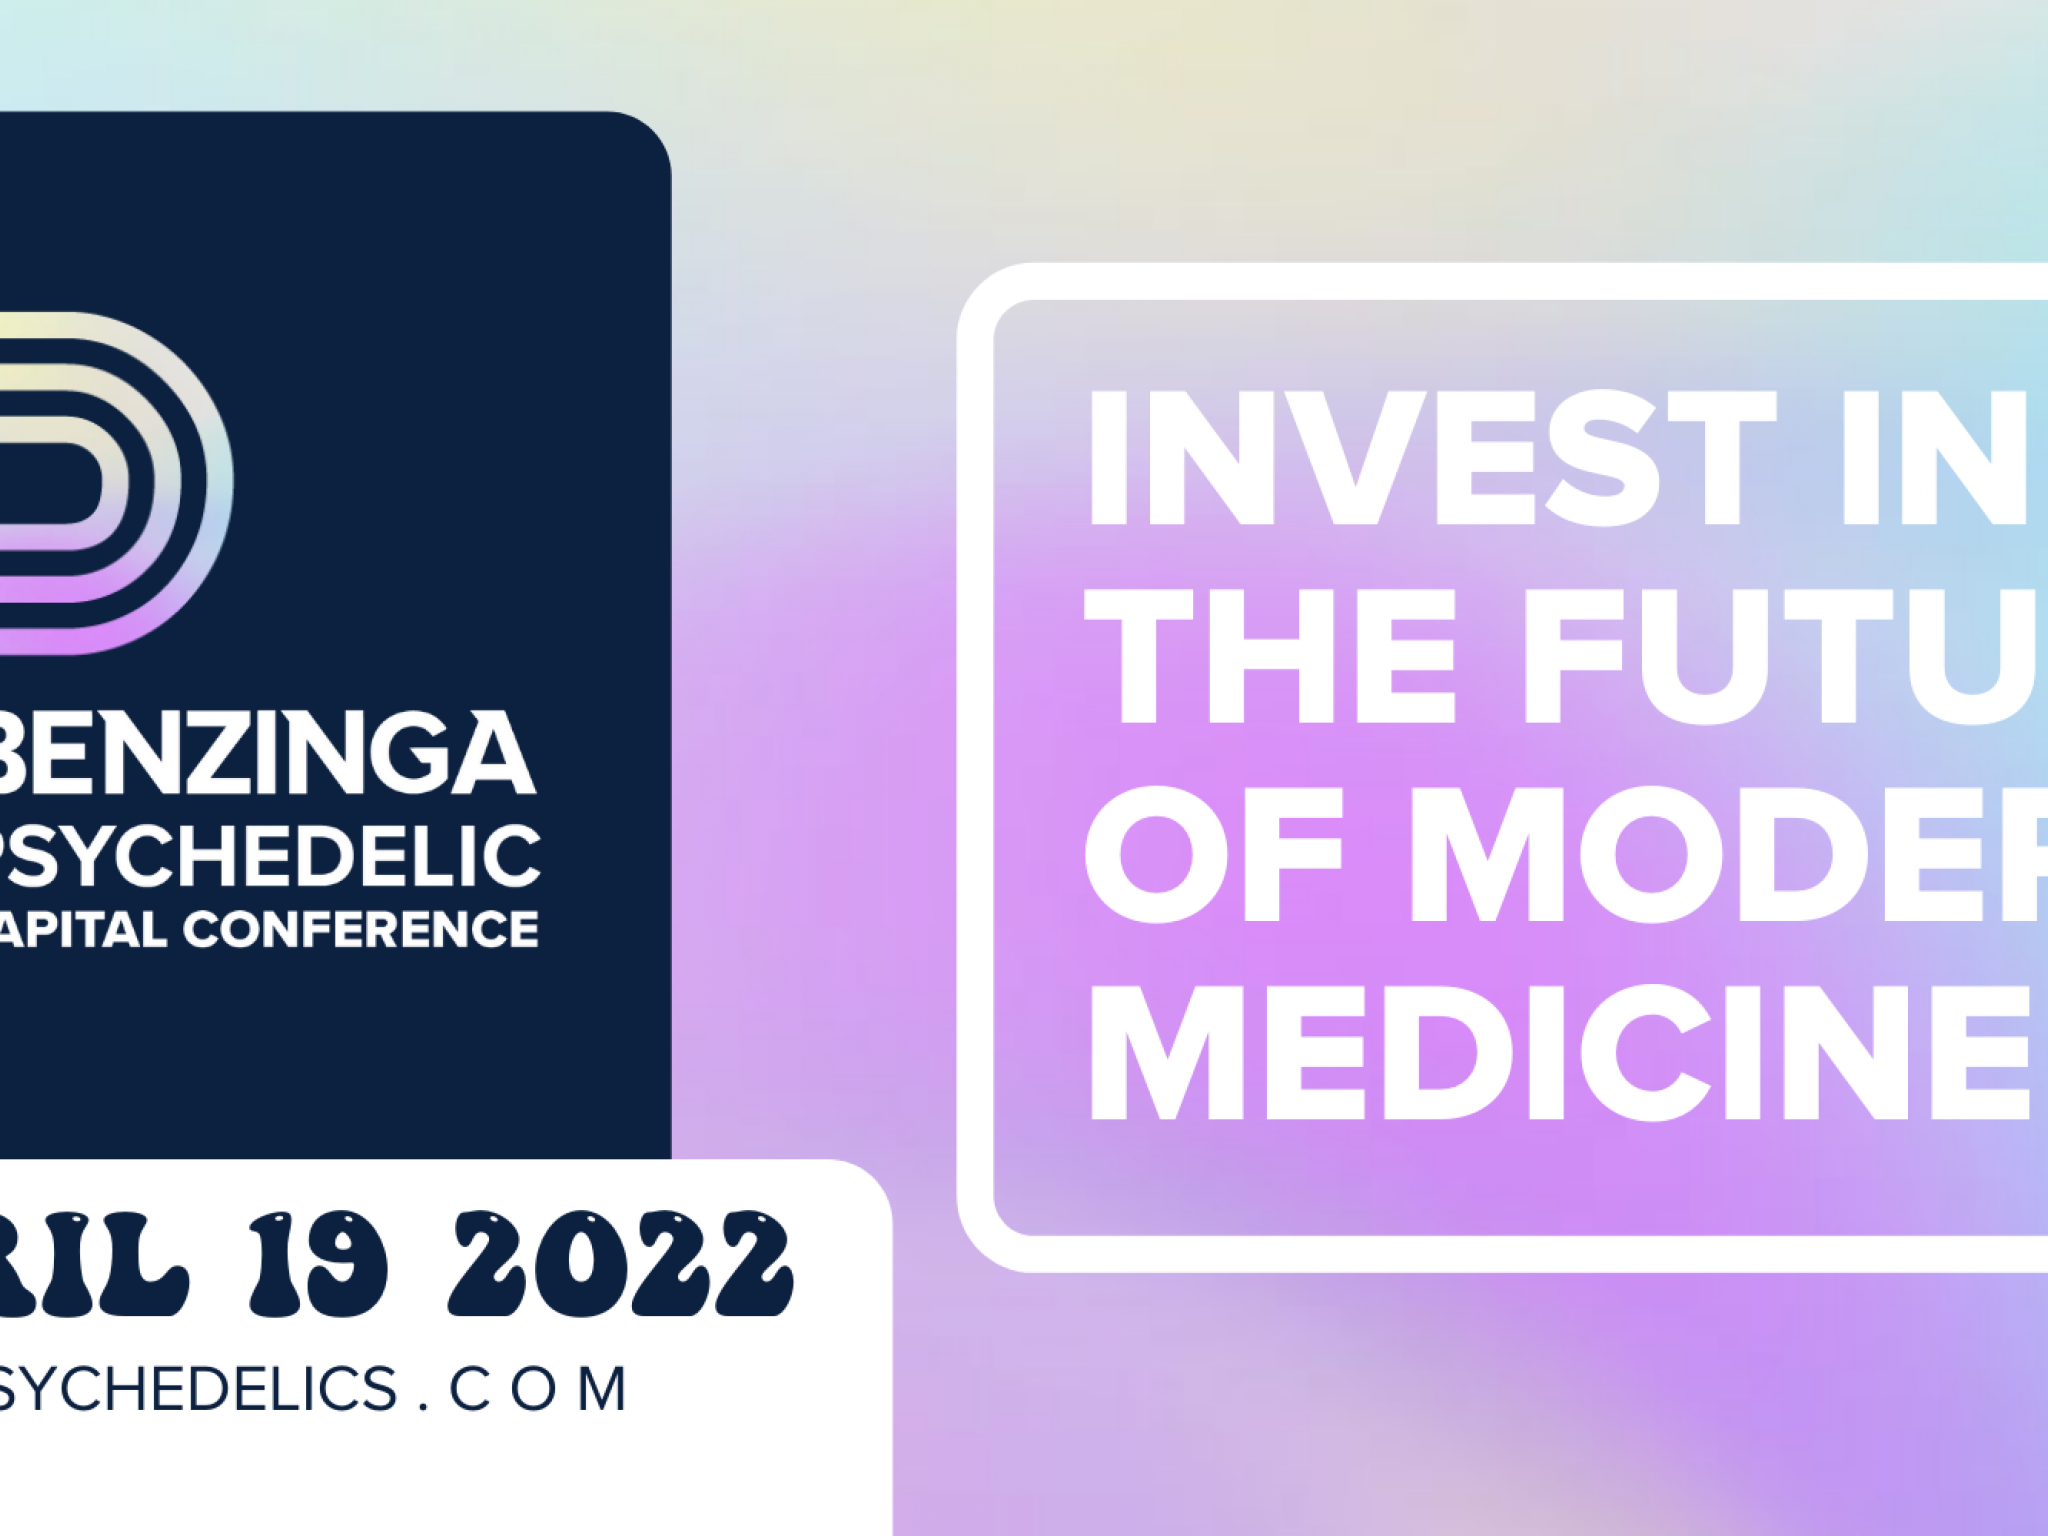  benzingas-unprecedented-psychedelics-investing-conference-lands-in-miami-on-april-19th 